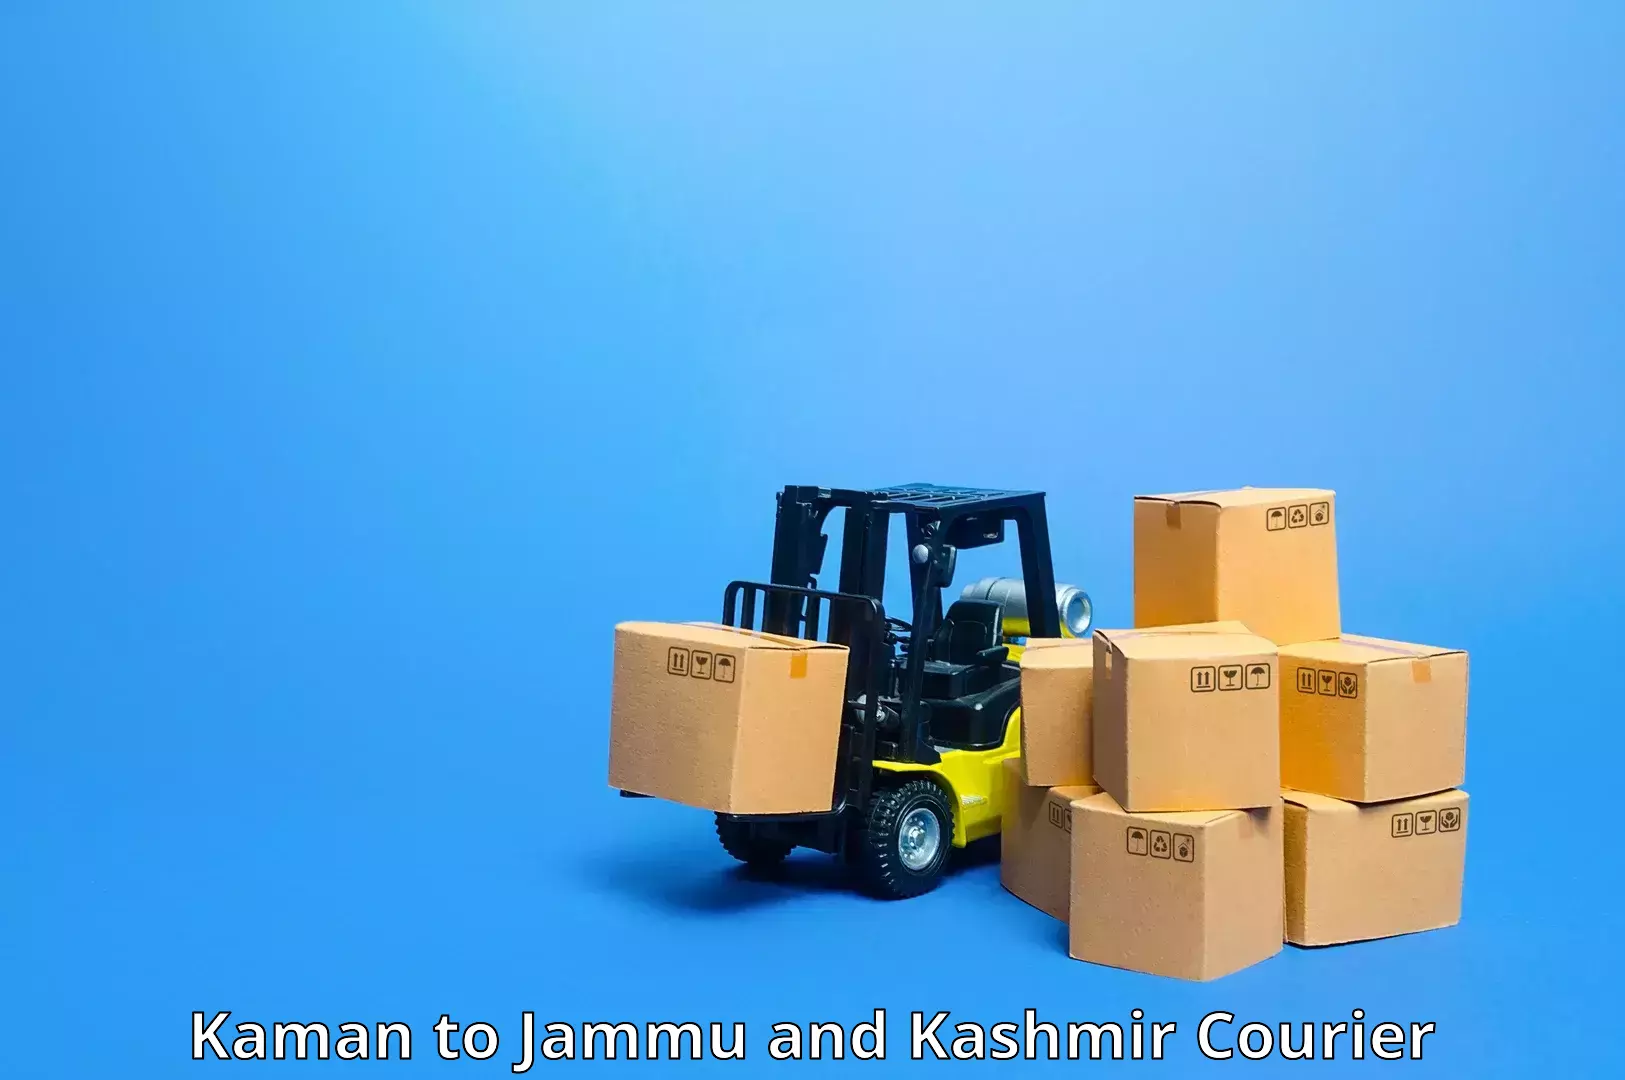 Flexible delivery schedules Kaman to Jammu and Kashmir